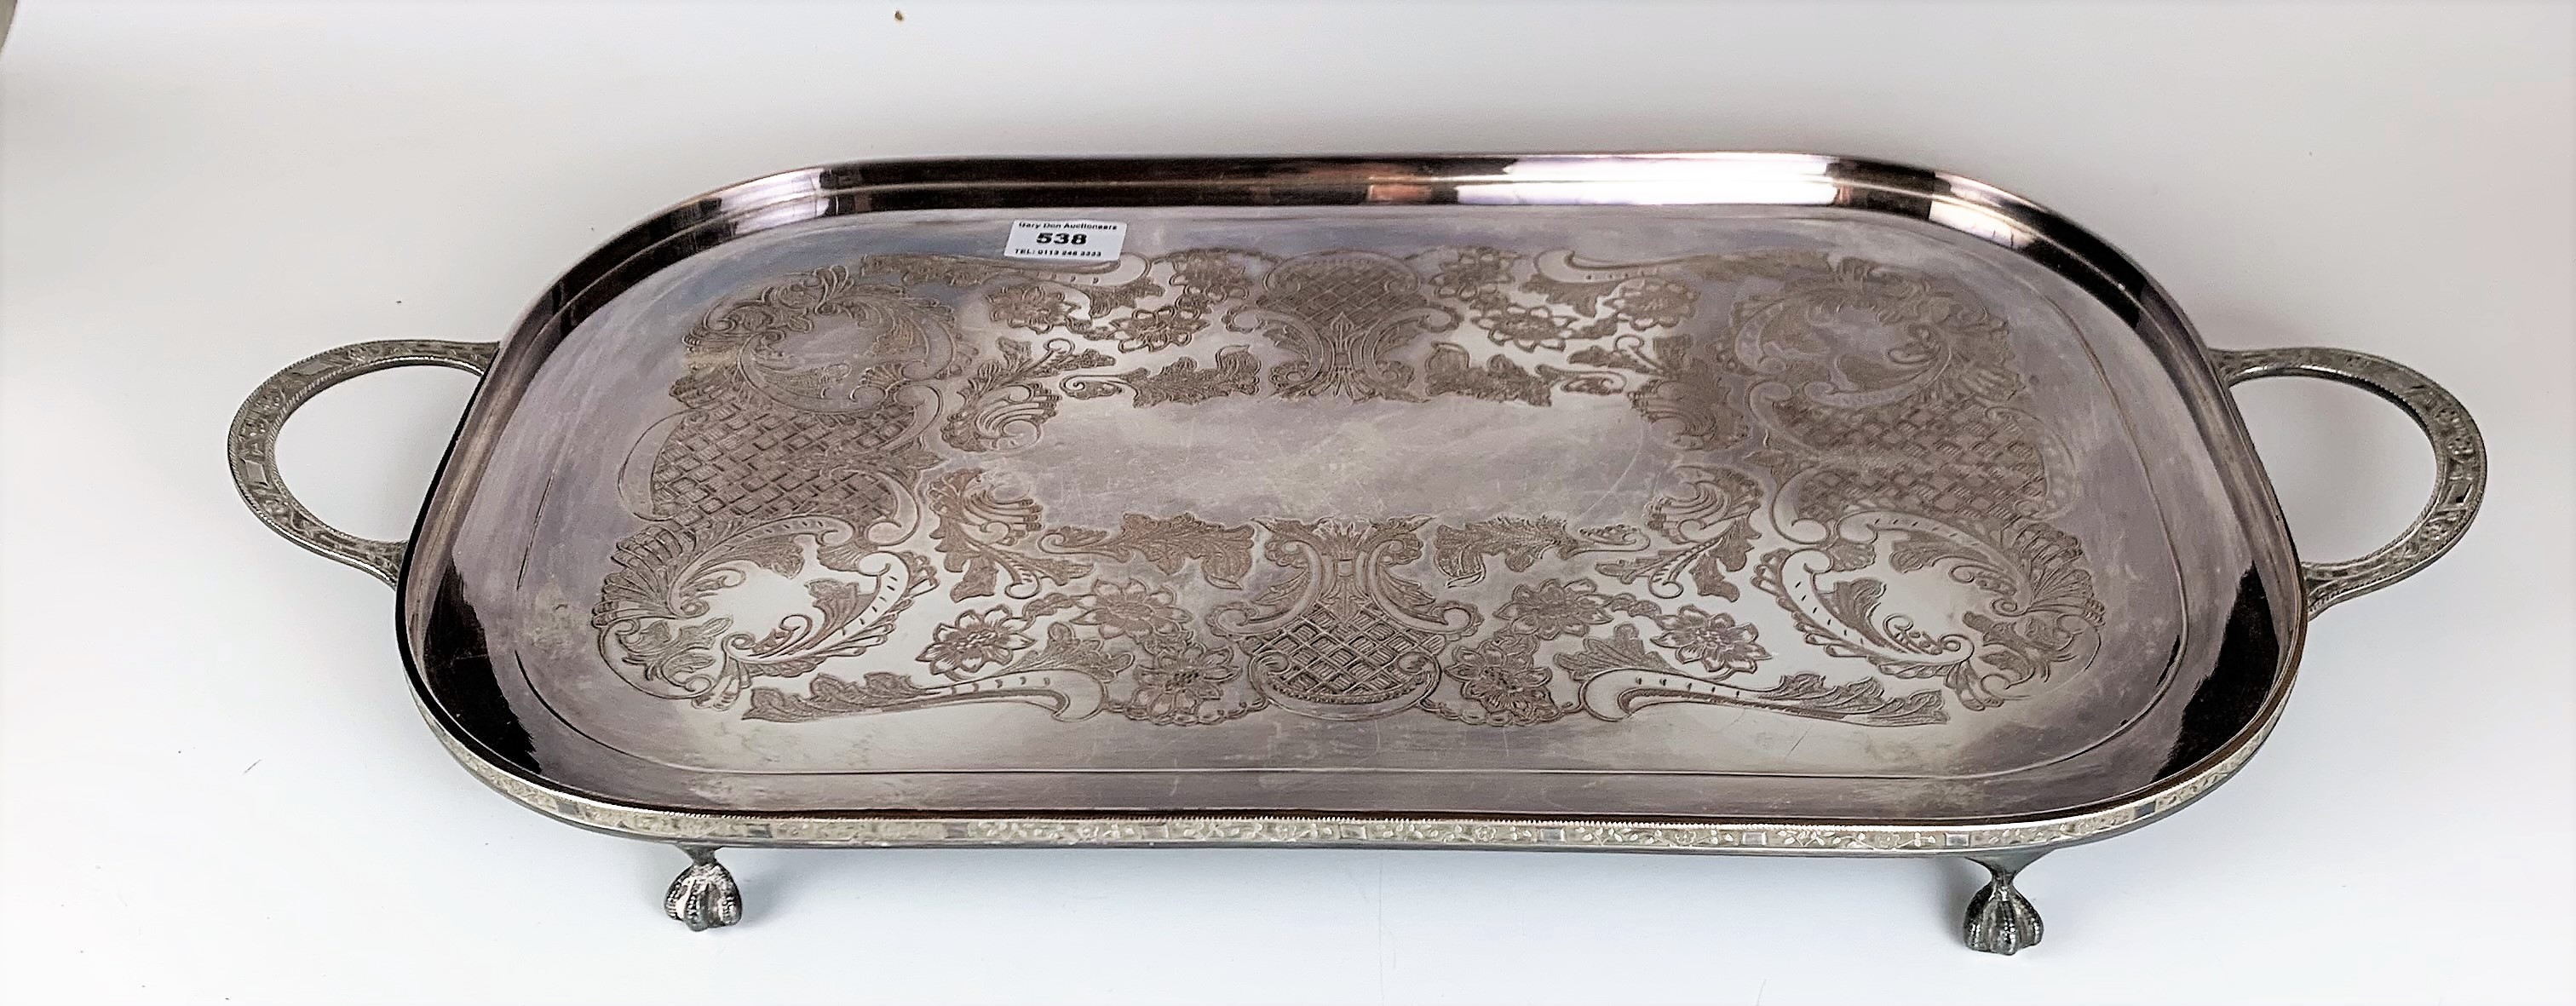 Plated embossed gallery tray 23” long x 11.5” wide